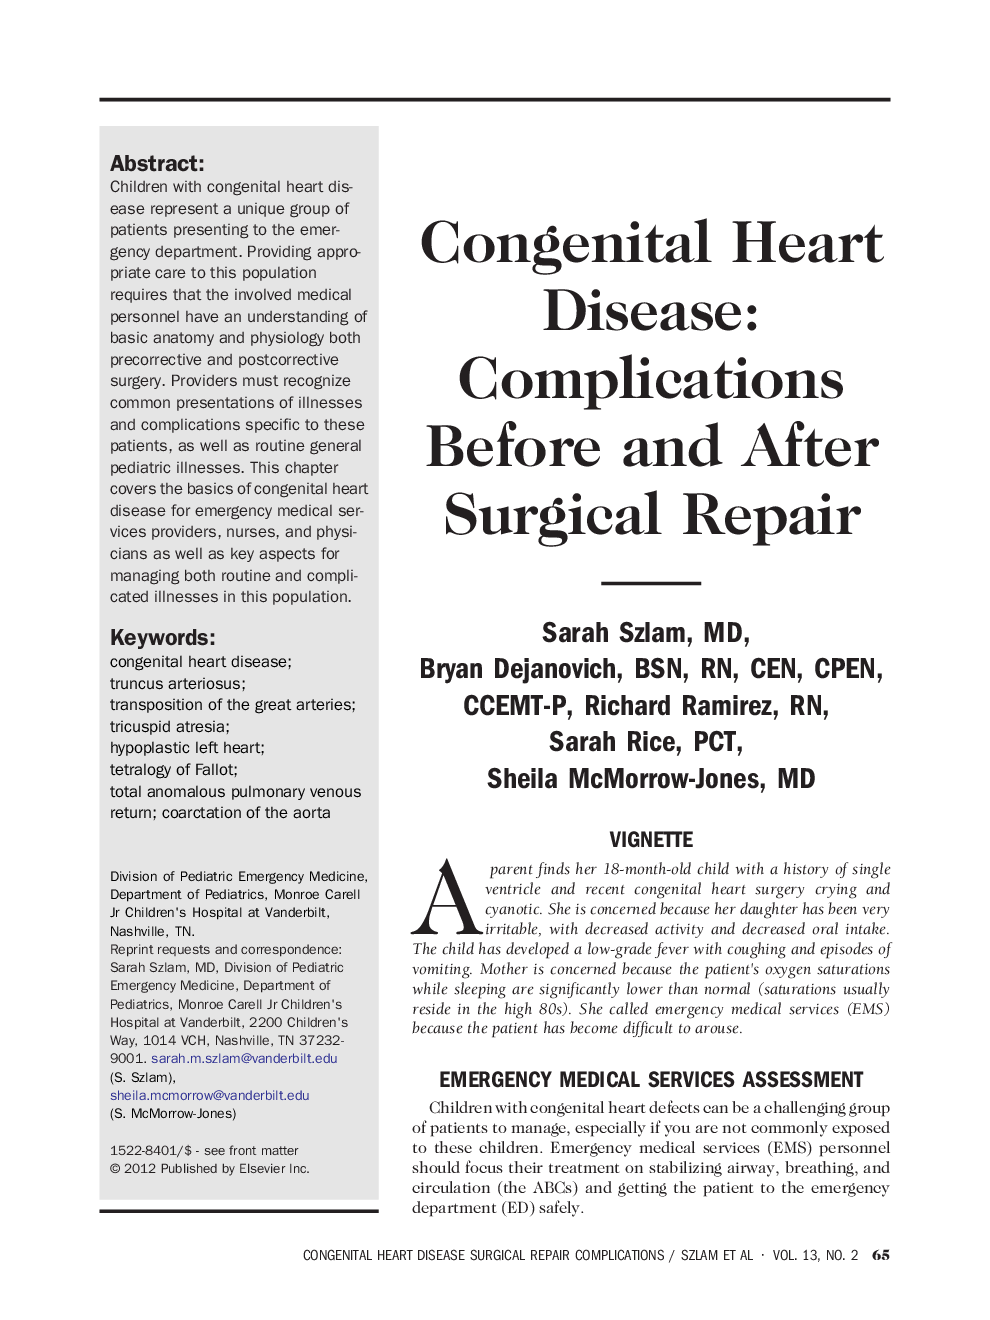 Congenital Heart Disease: Complications Before and After Surgical Repair